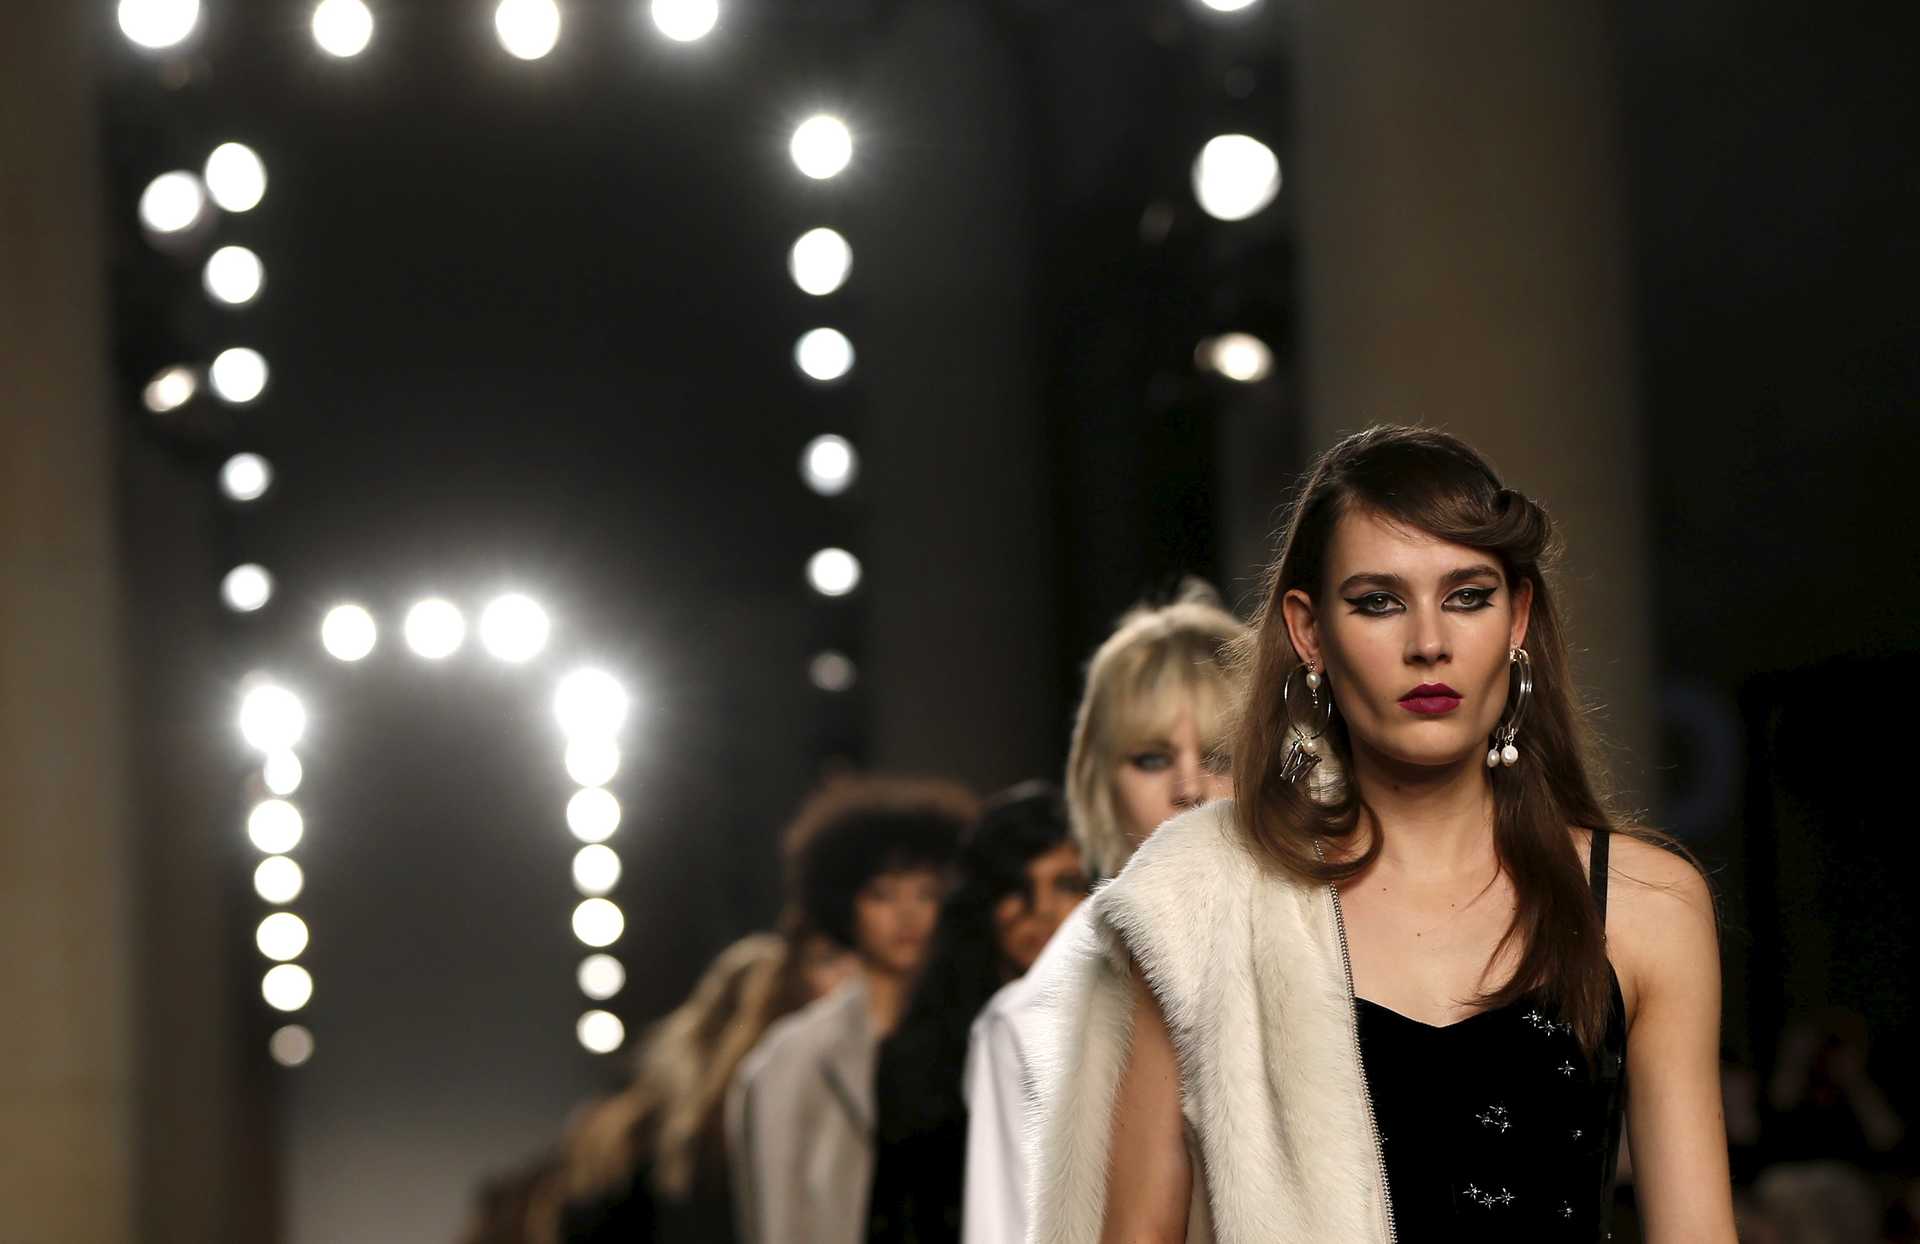 Models present creations at the Topshop Unique catwalk show at London Fashion Week Autumn/Winter 2016 in London, Britain